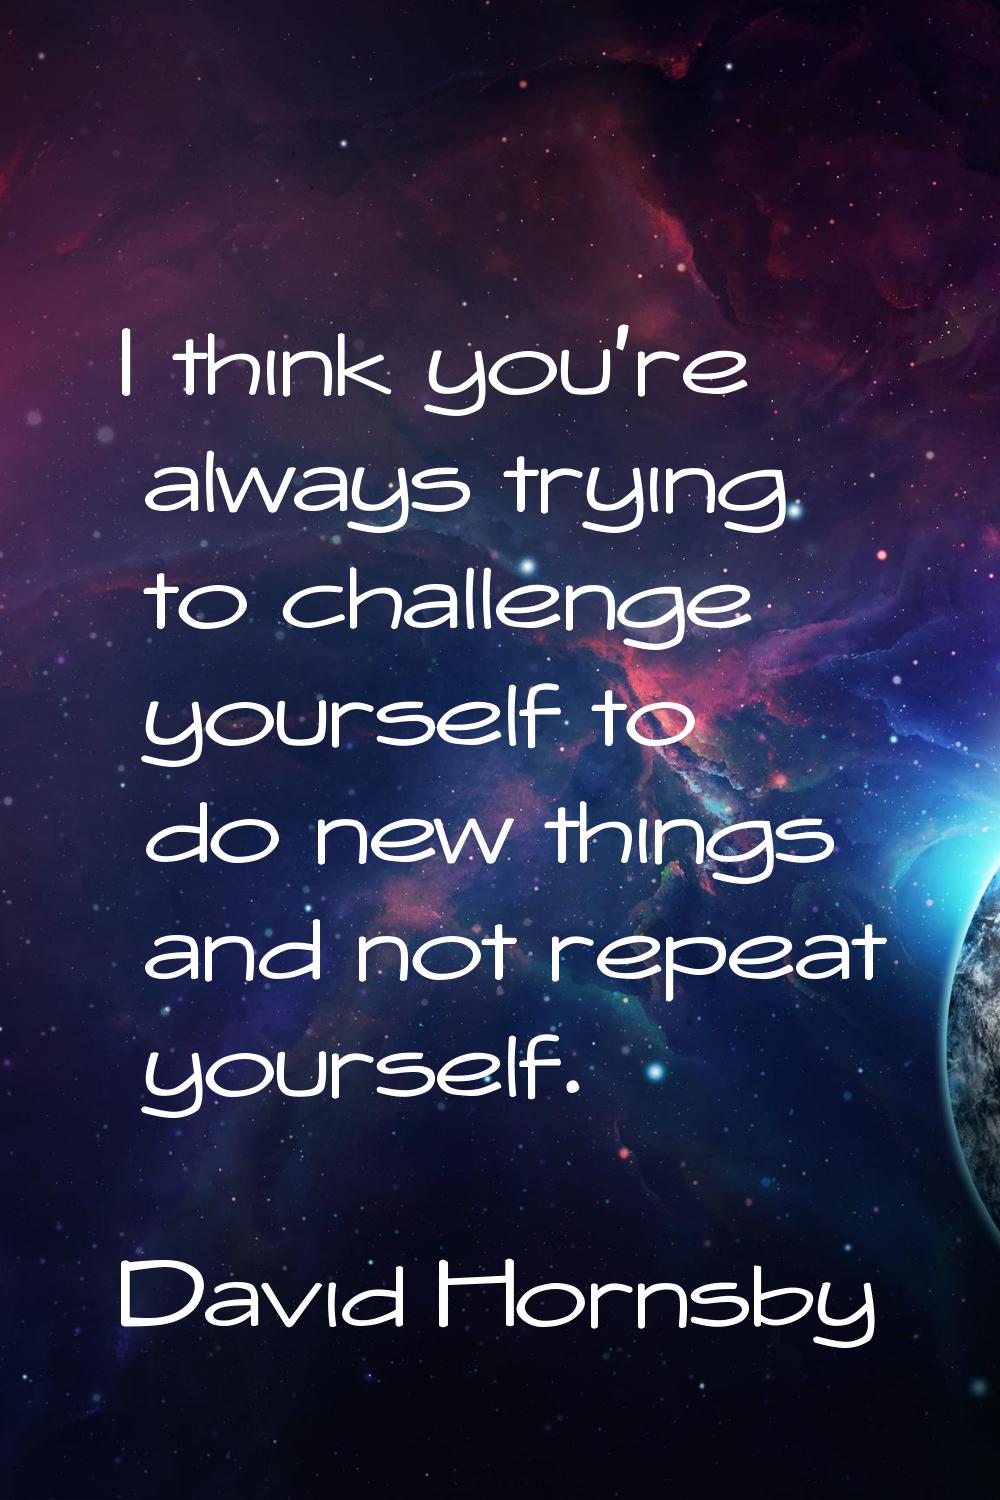 I think you're always trying to challenge yourself to do new things and not repeat yourself.